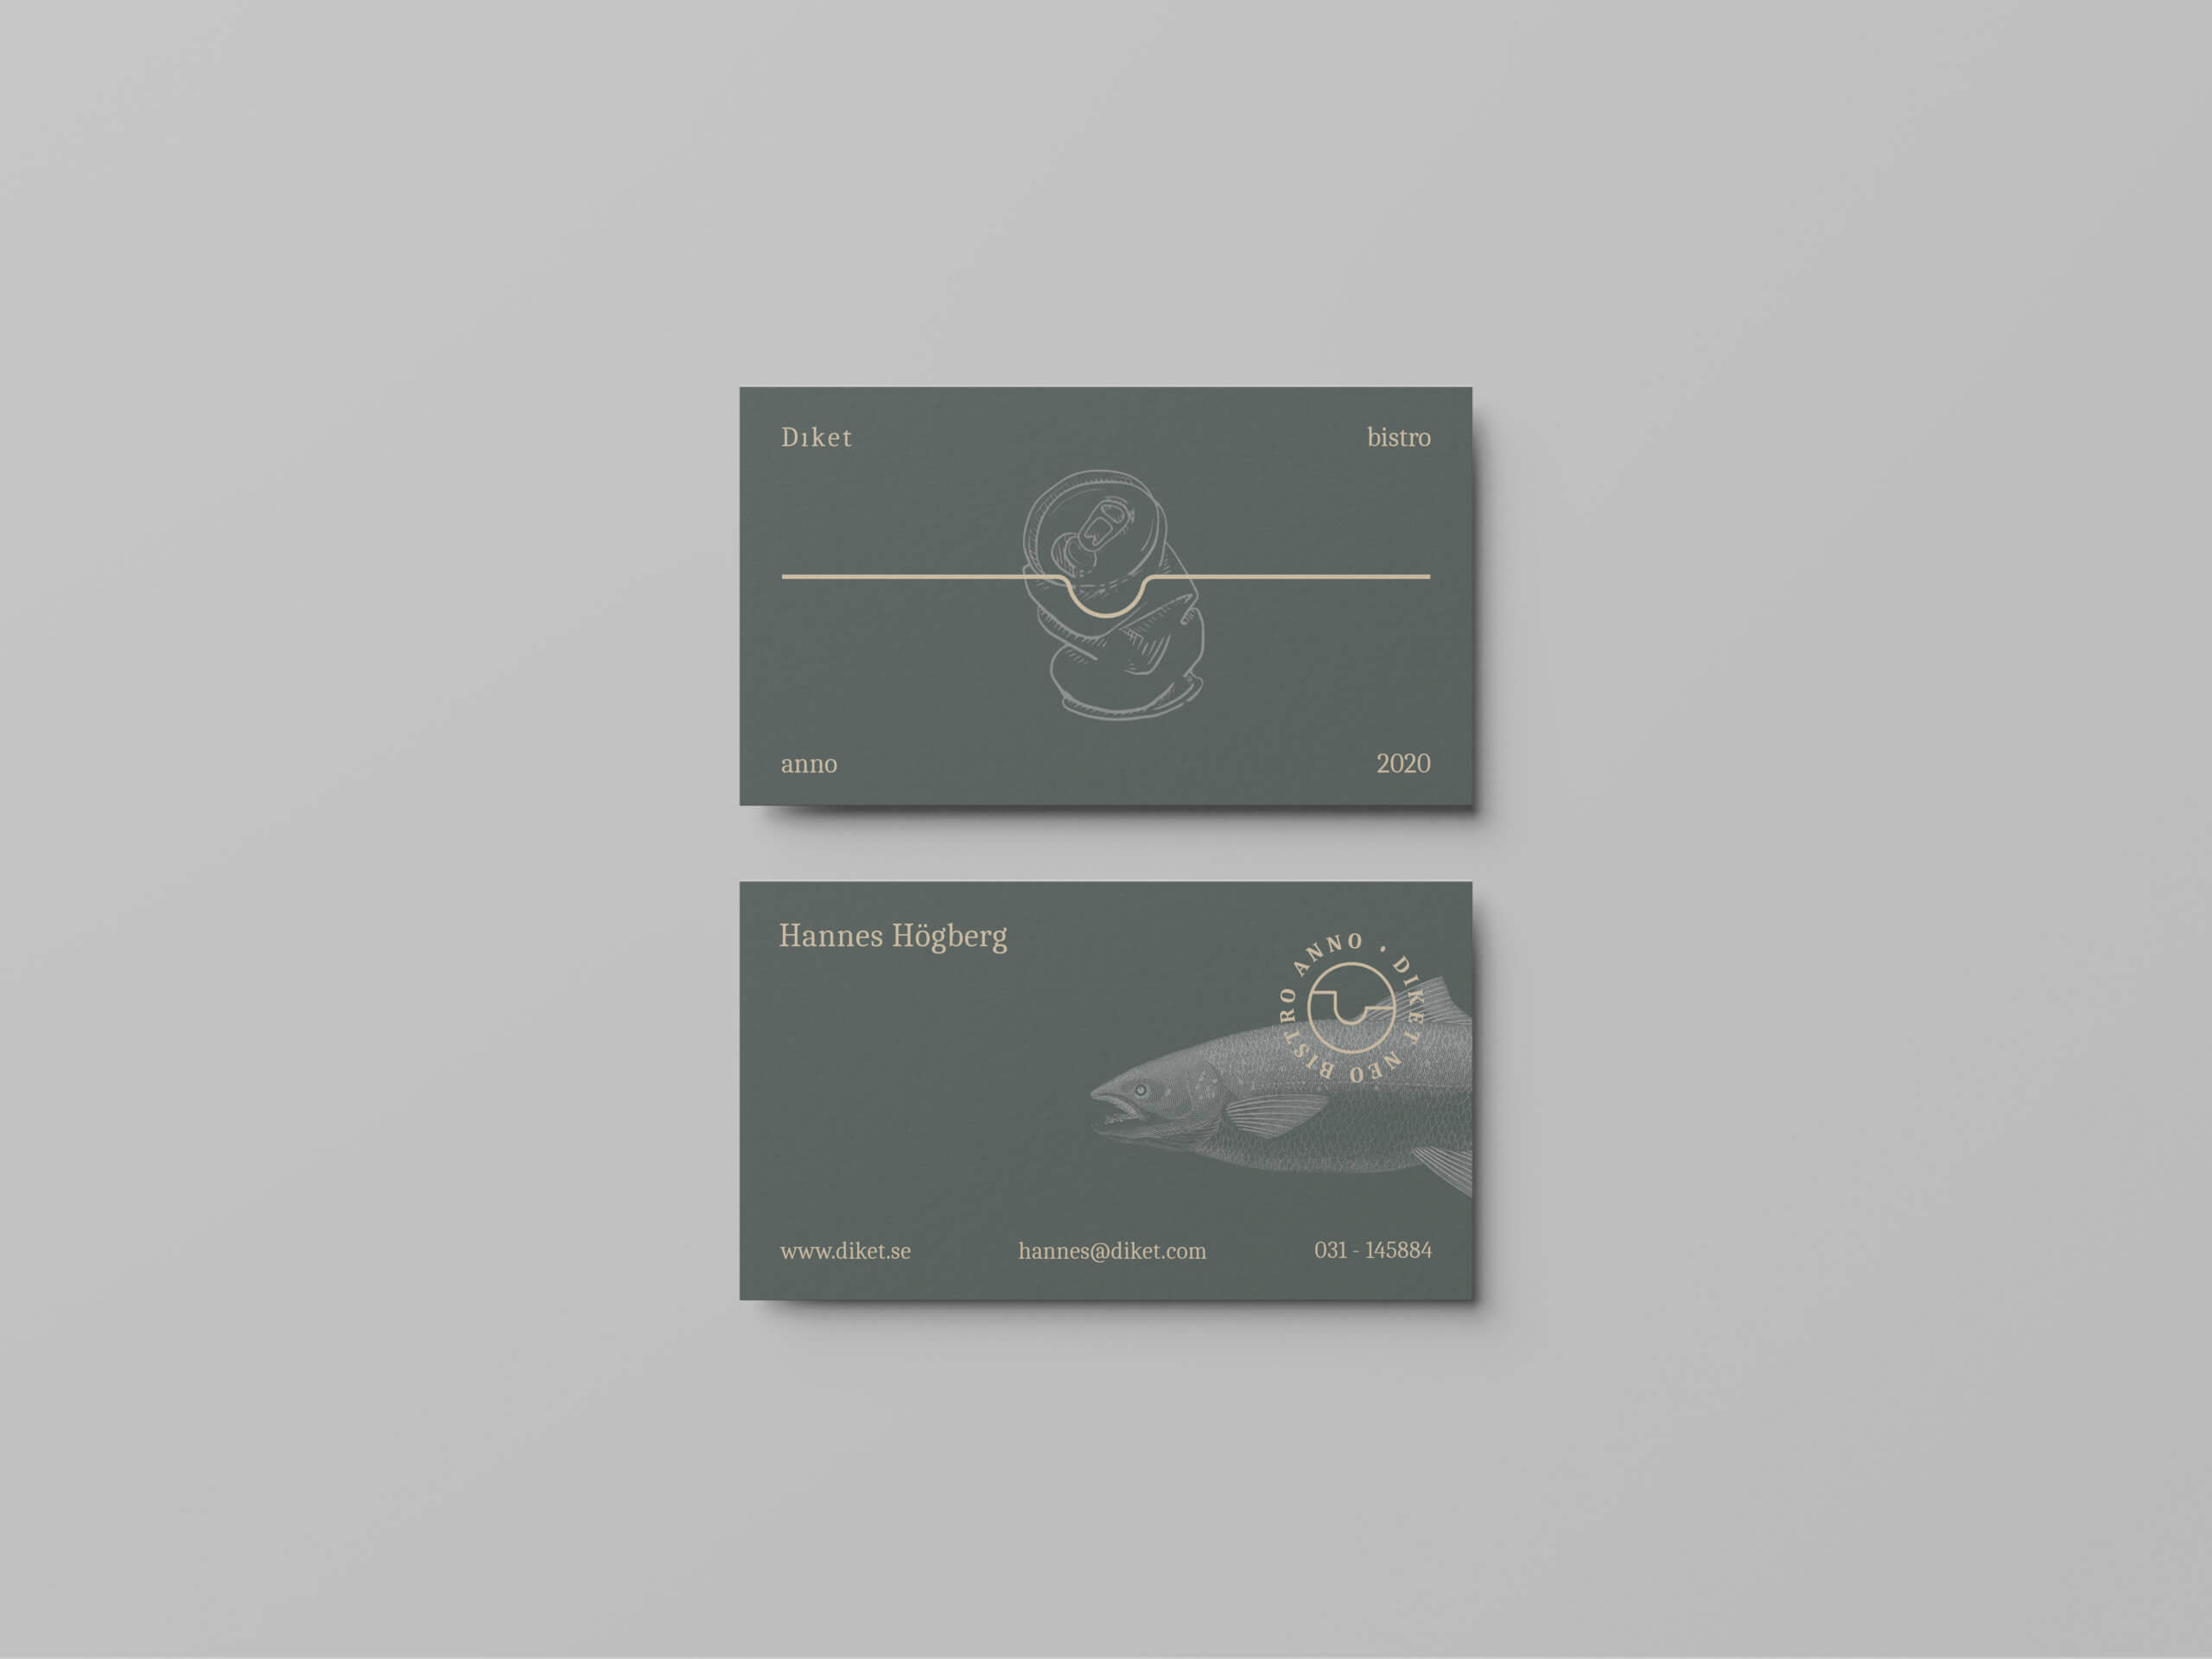 Business Card Mockup Vol.3 by Anthony Boyd Graphics